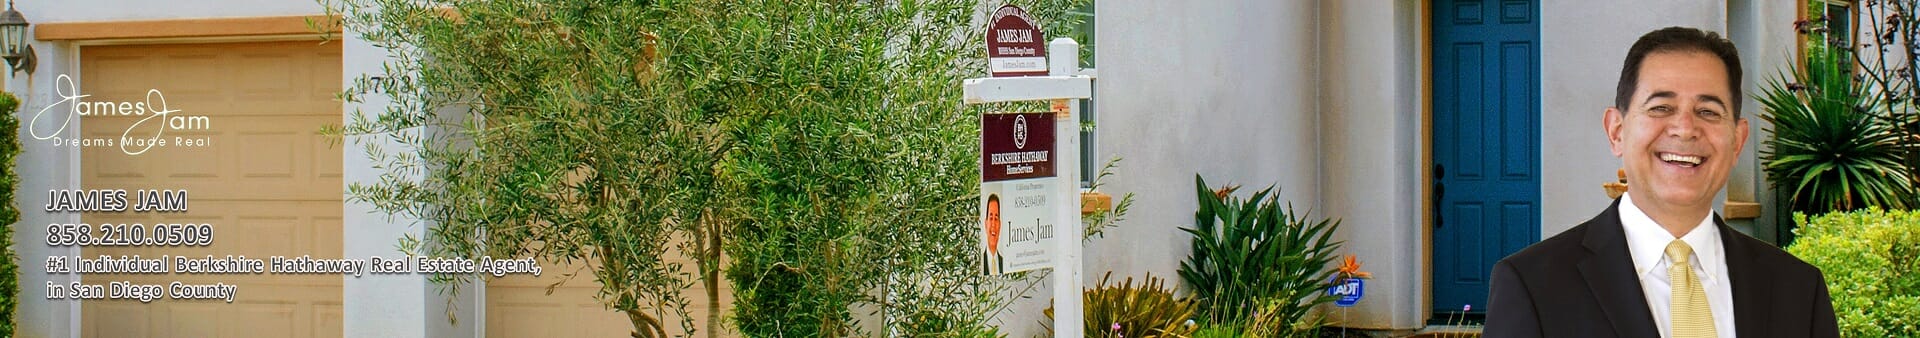 Why use a Real Estate Agent in Carlsbad – Should you Sell a Home Without a Real Estate Agent?